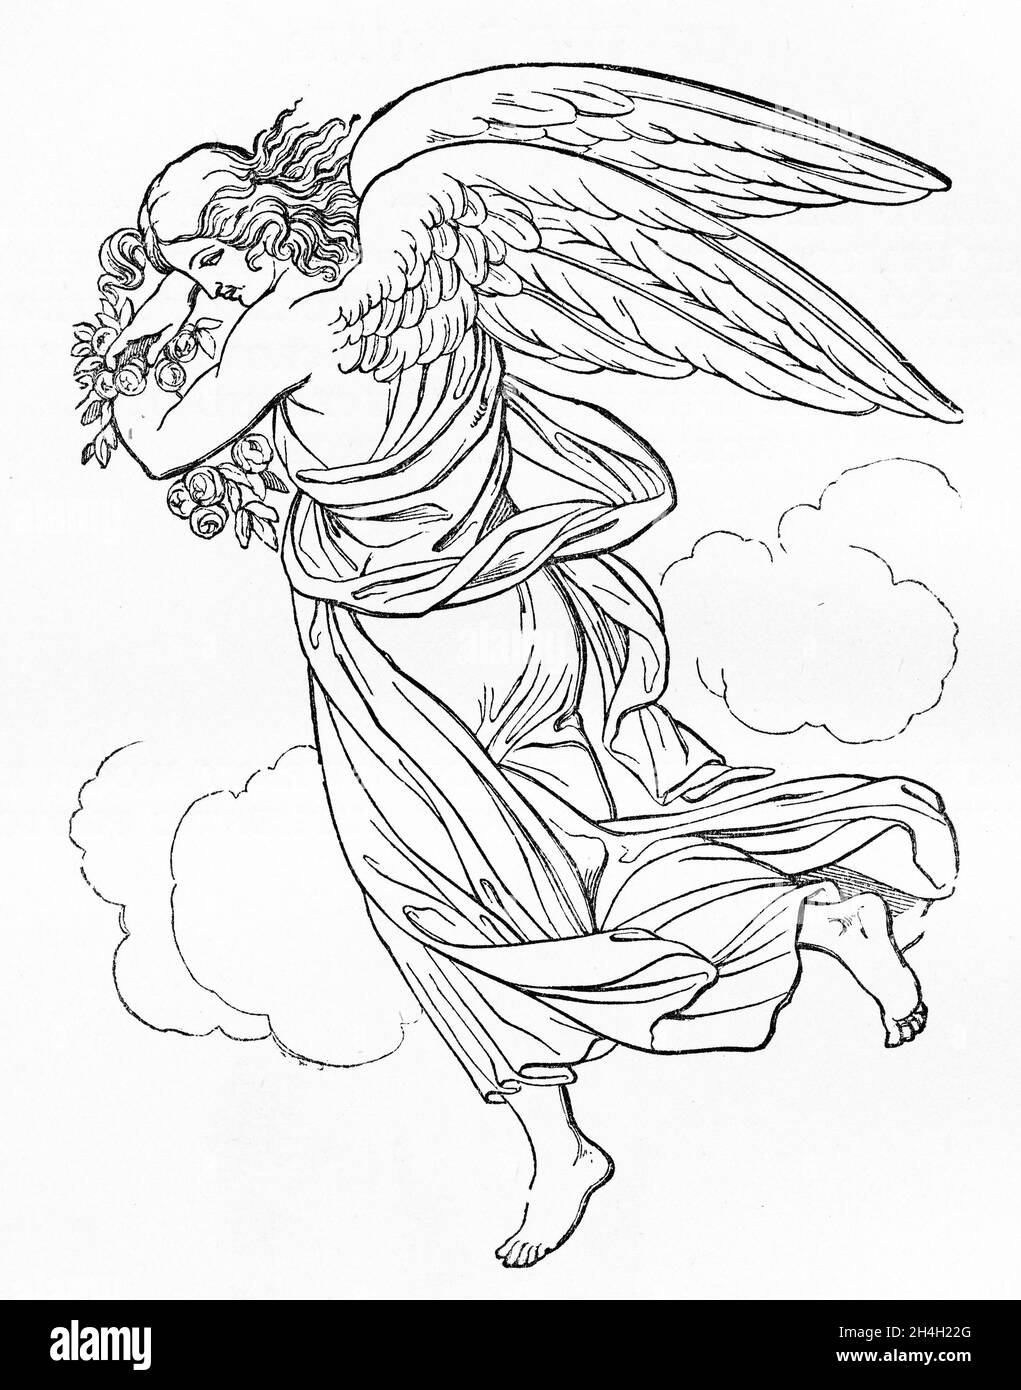 Engraving of an angel carrying a bouquet of flowers Stock Photo